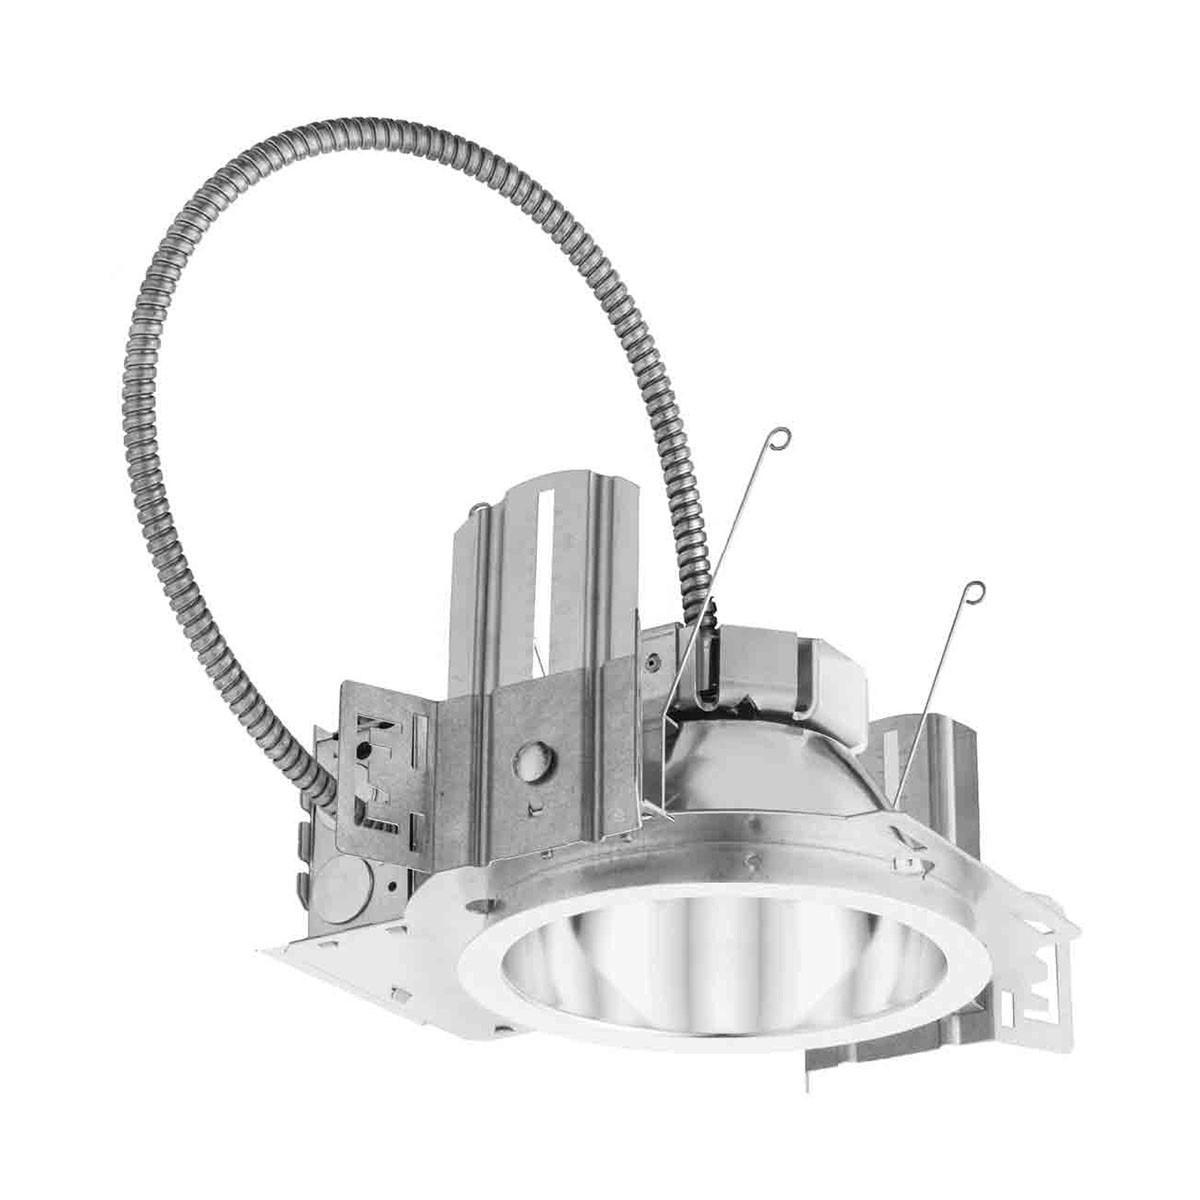 Lithonia LDN6 Commercial LED Recessed Downlight, 1000 lumens, 3500K (Reflector Sold Separately) - Bees Lighting